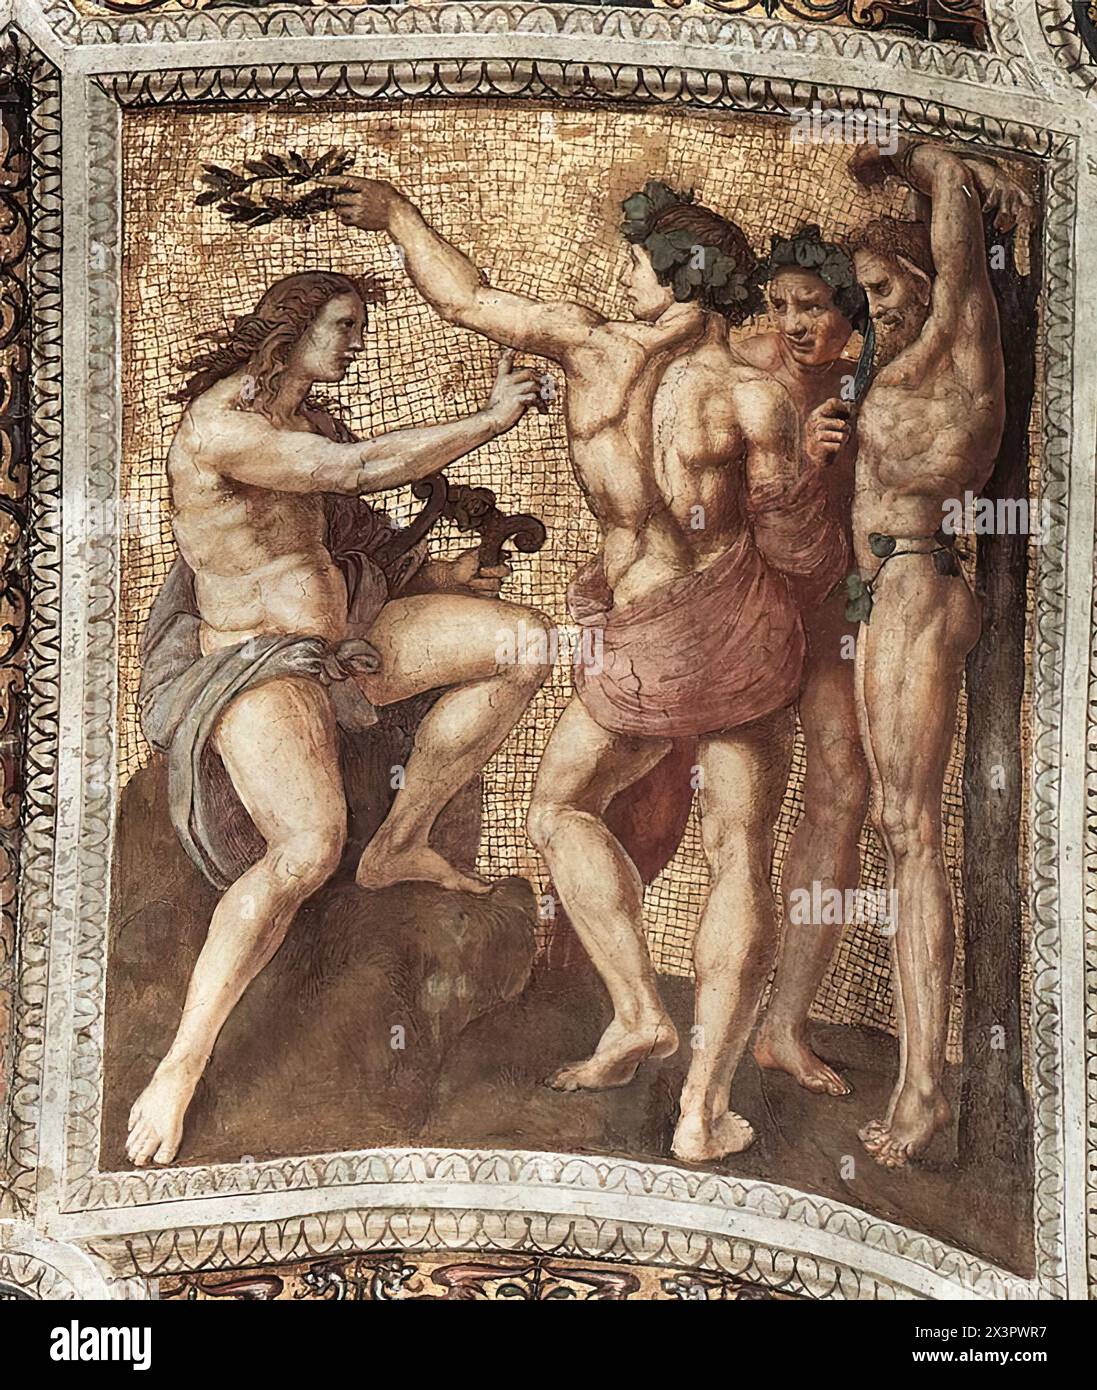 RAFFAELLO Sanzio (b. 1483, Urbino, d. 1520, Roma)  Apollo and Marsyas (ceiling panel) 1509-11 Fresco, 120 x 105 cm Stanza della Segnatura, Palazzi Pontifici, Vatican  The shepherd Marsyas had challenged the god Apollo to a musical contest. Marsyas lost and as a punishment for daring to challenge a god he was flayed alive. The scene is an allegory of divine harmony triumphing over earthly passion. With its unrhythmical composition and its elongated figures, this scene is probably by an unknown hand, and not by Raphael.       --- Keywords: --------------  Author: RAFFAELLO Sanzio Title: Apollo a Stock Photo